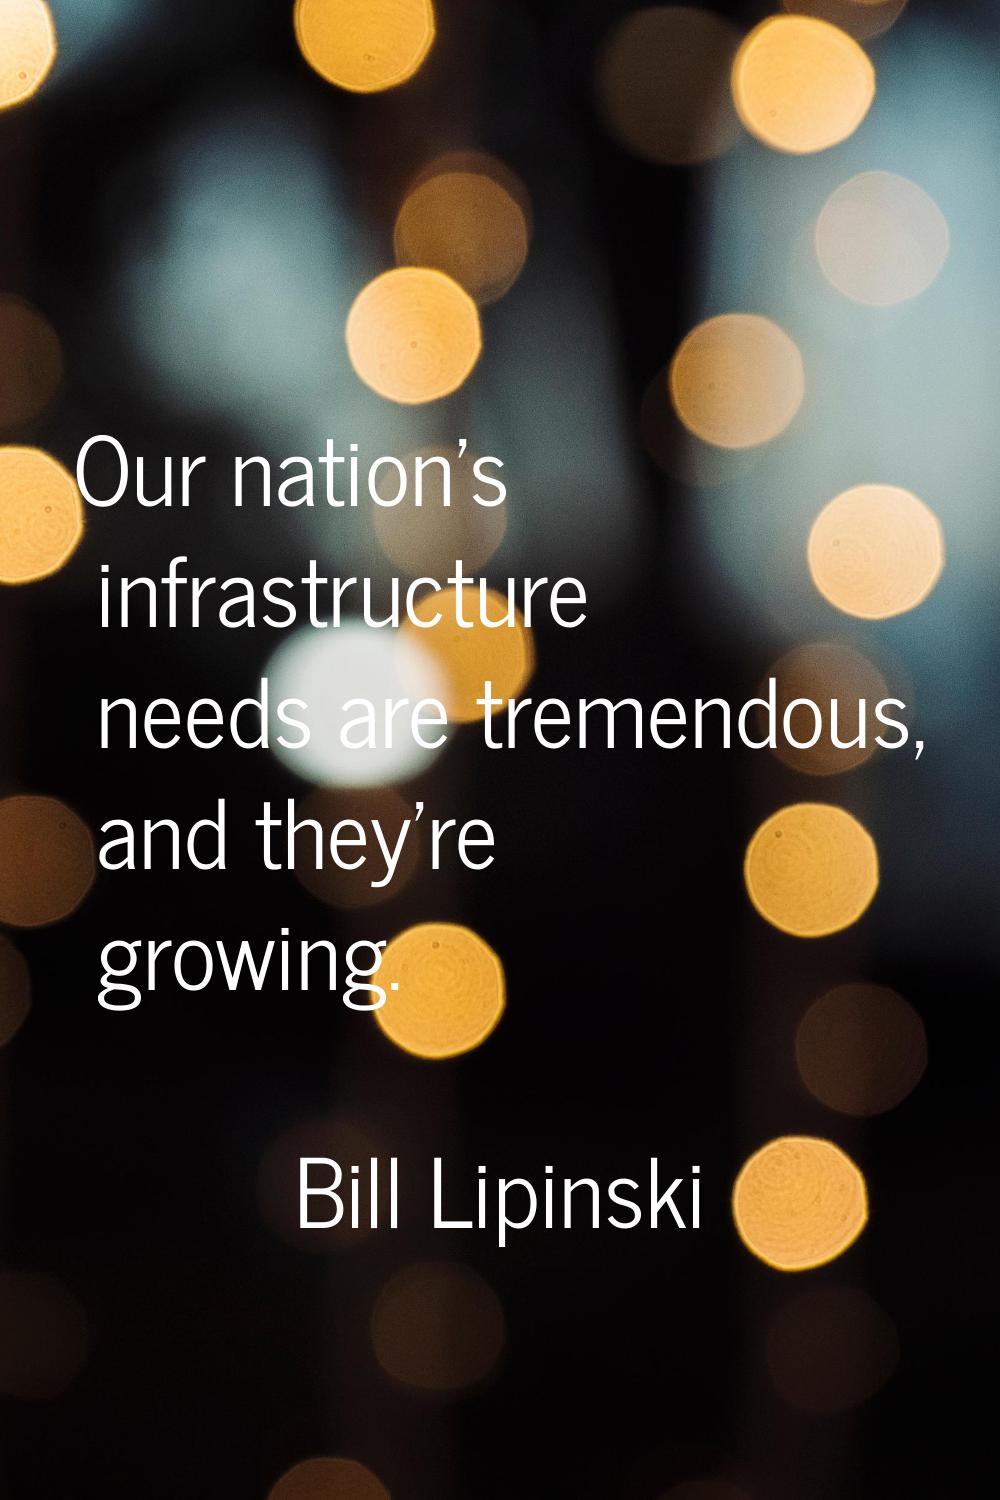 Our nation's infrastructure needs are tremendous, and they're growing.